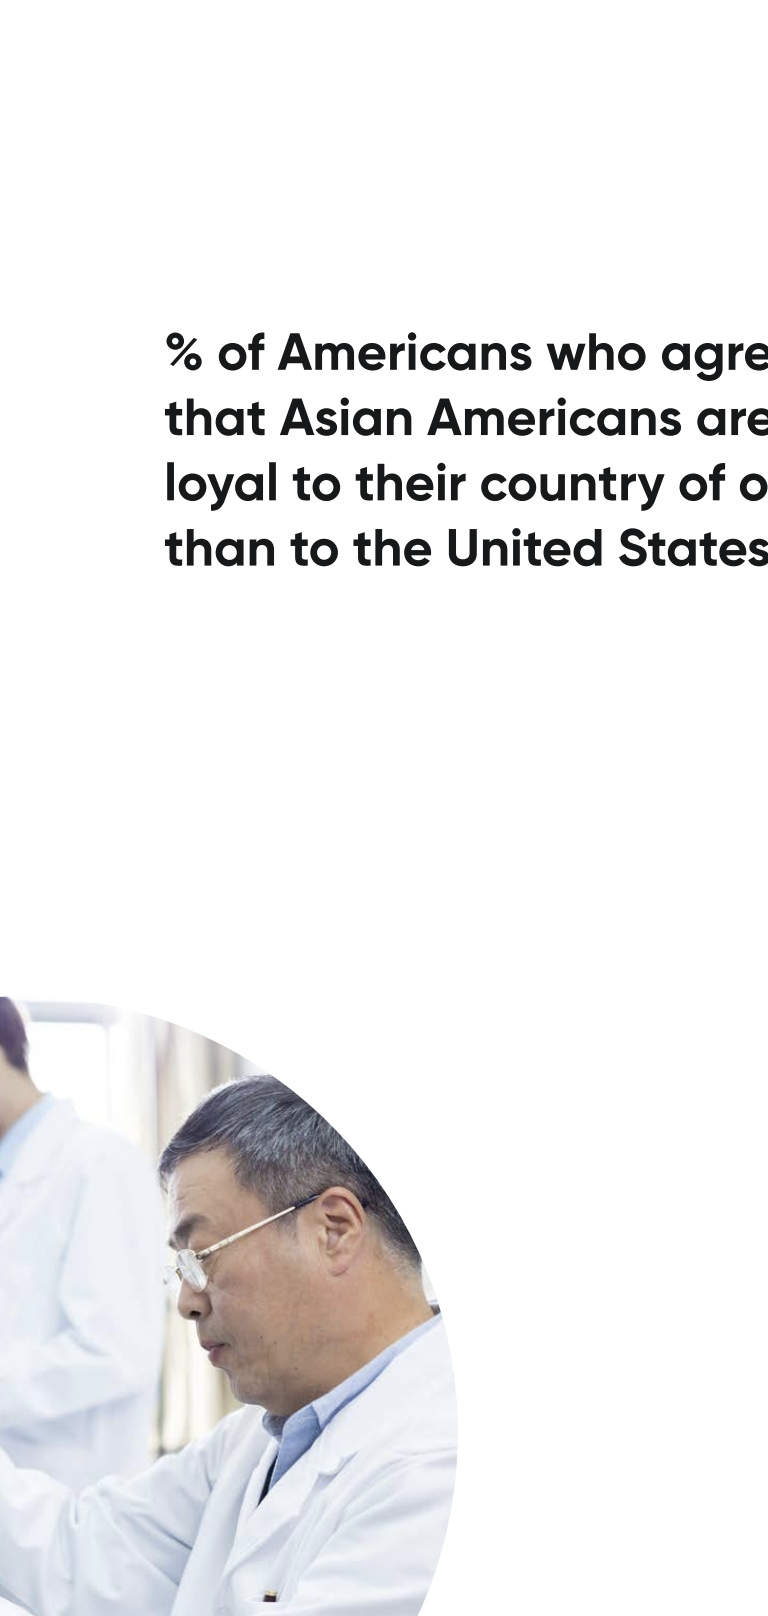 A bar chart showing 33% of Americans believe Asian Americans are more loyal to their country of origin than the U.S.